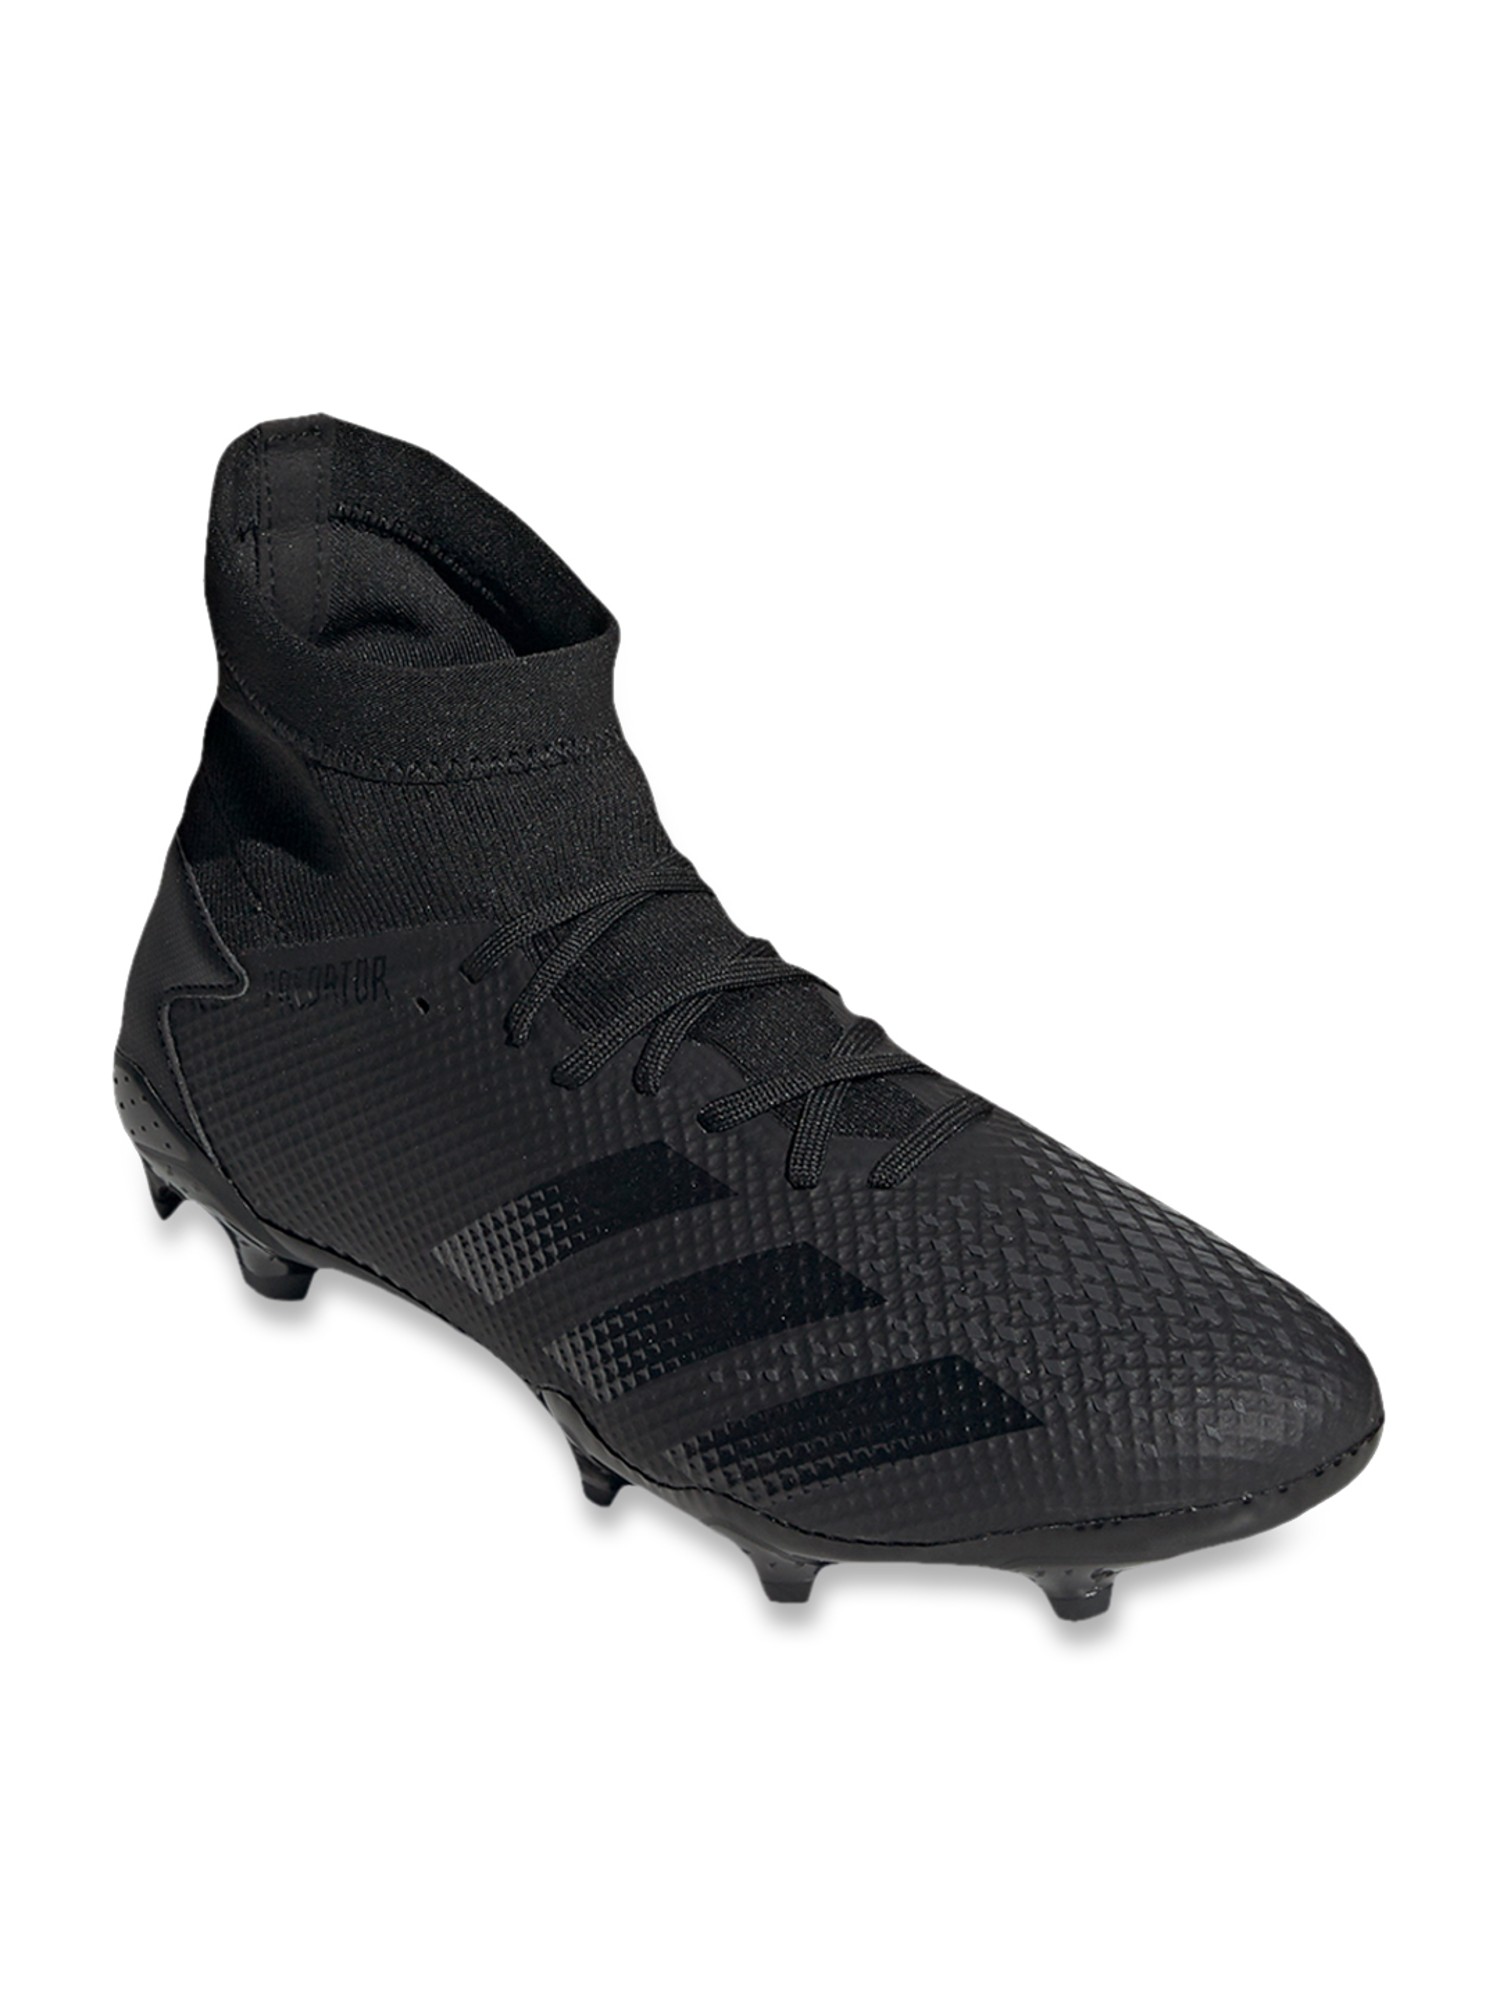 adidas black and white football shoes